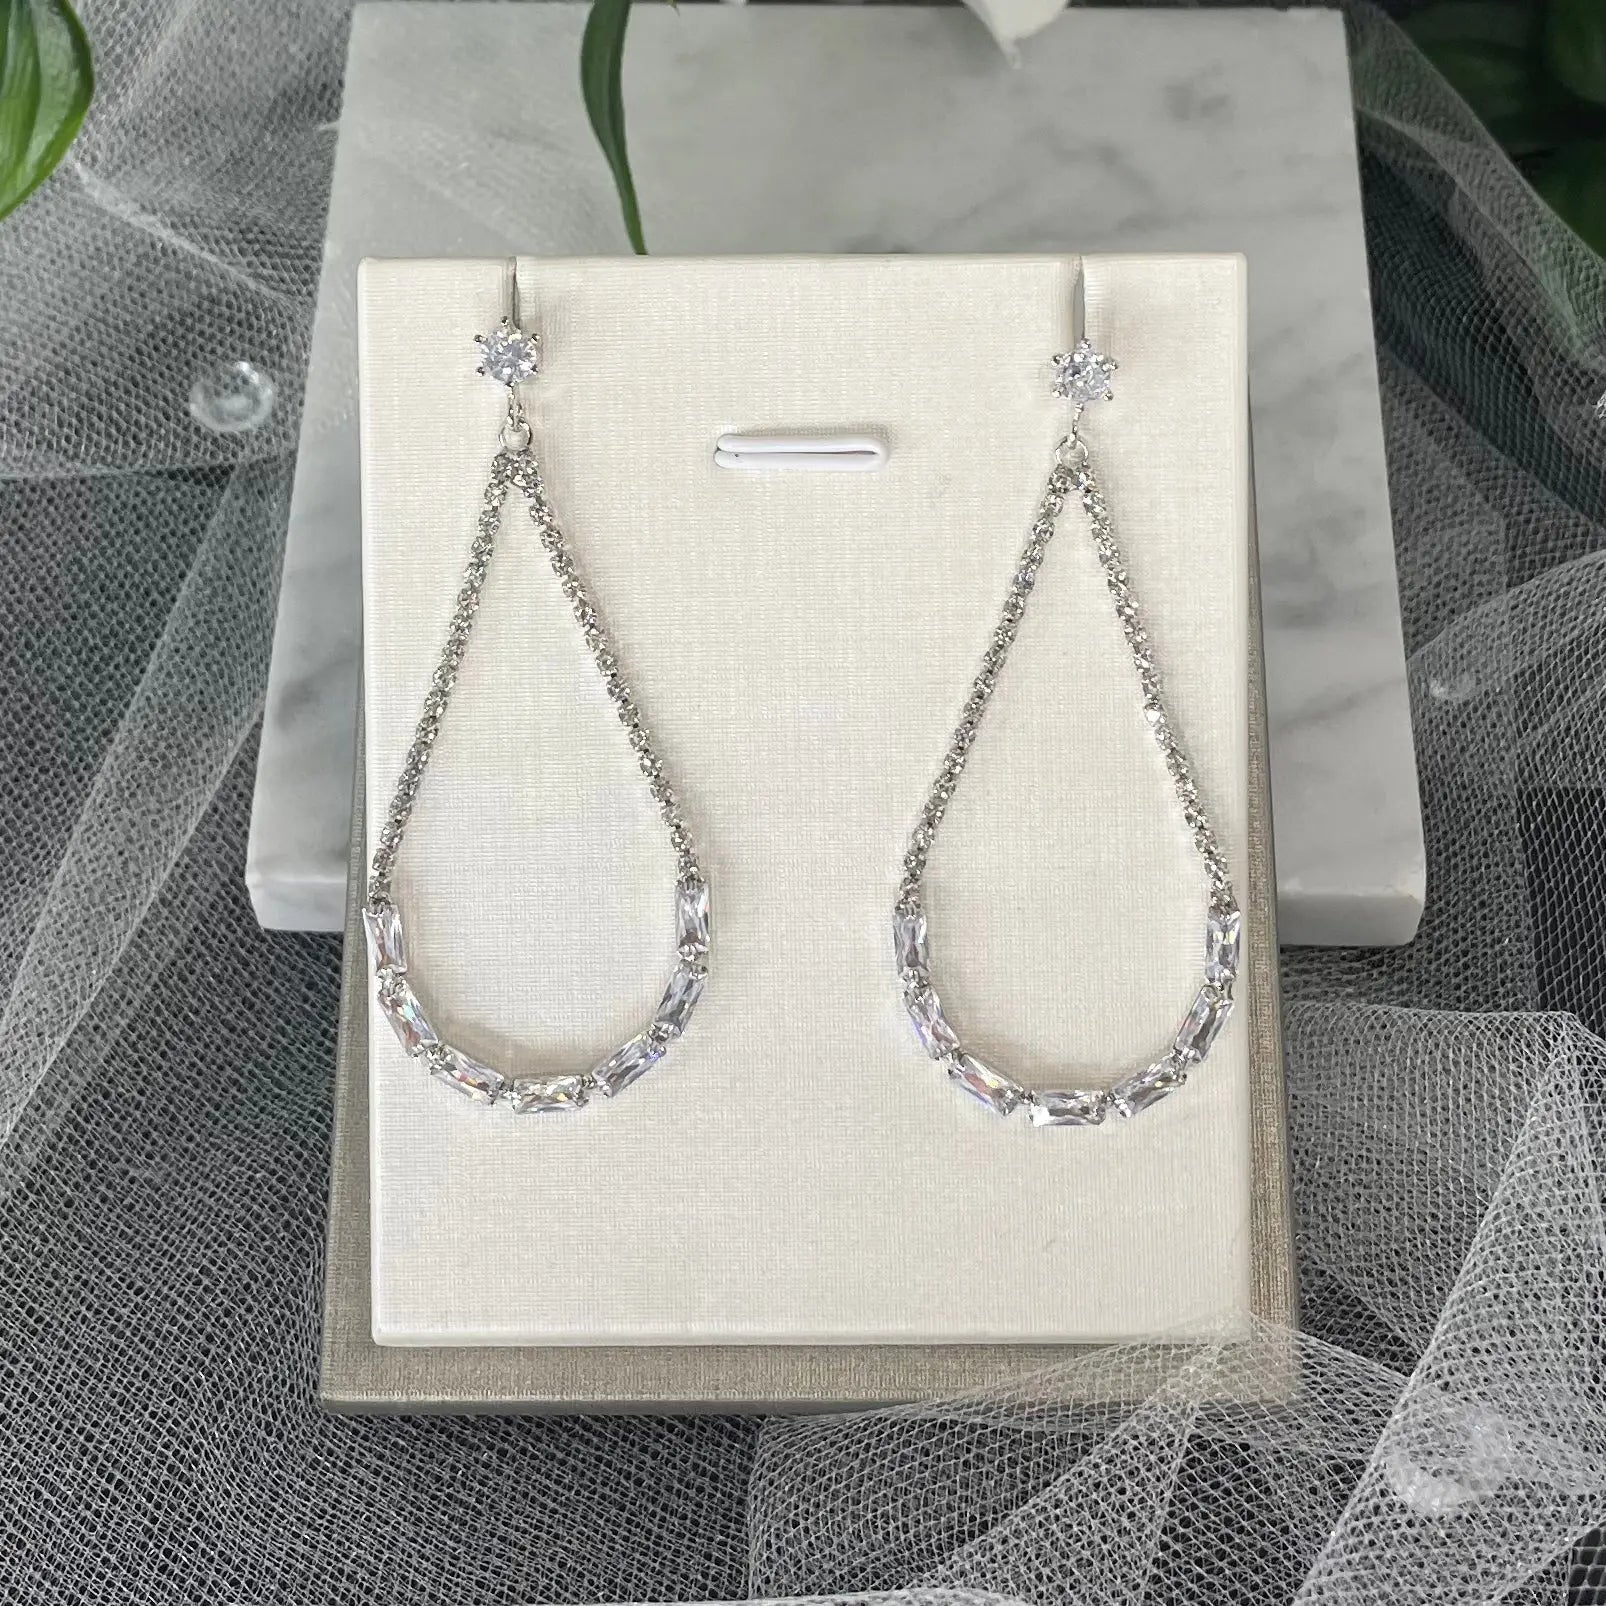 Andorra Teardrop Hoop Wedding Earrings featuring a unique modern design with crystals and diamantés, measuring 6 cm in total length and 2.7 cm at the widest point, perfect for weddings and special occasions.